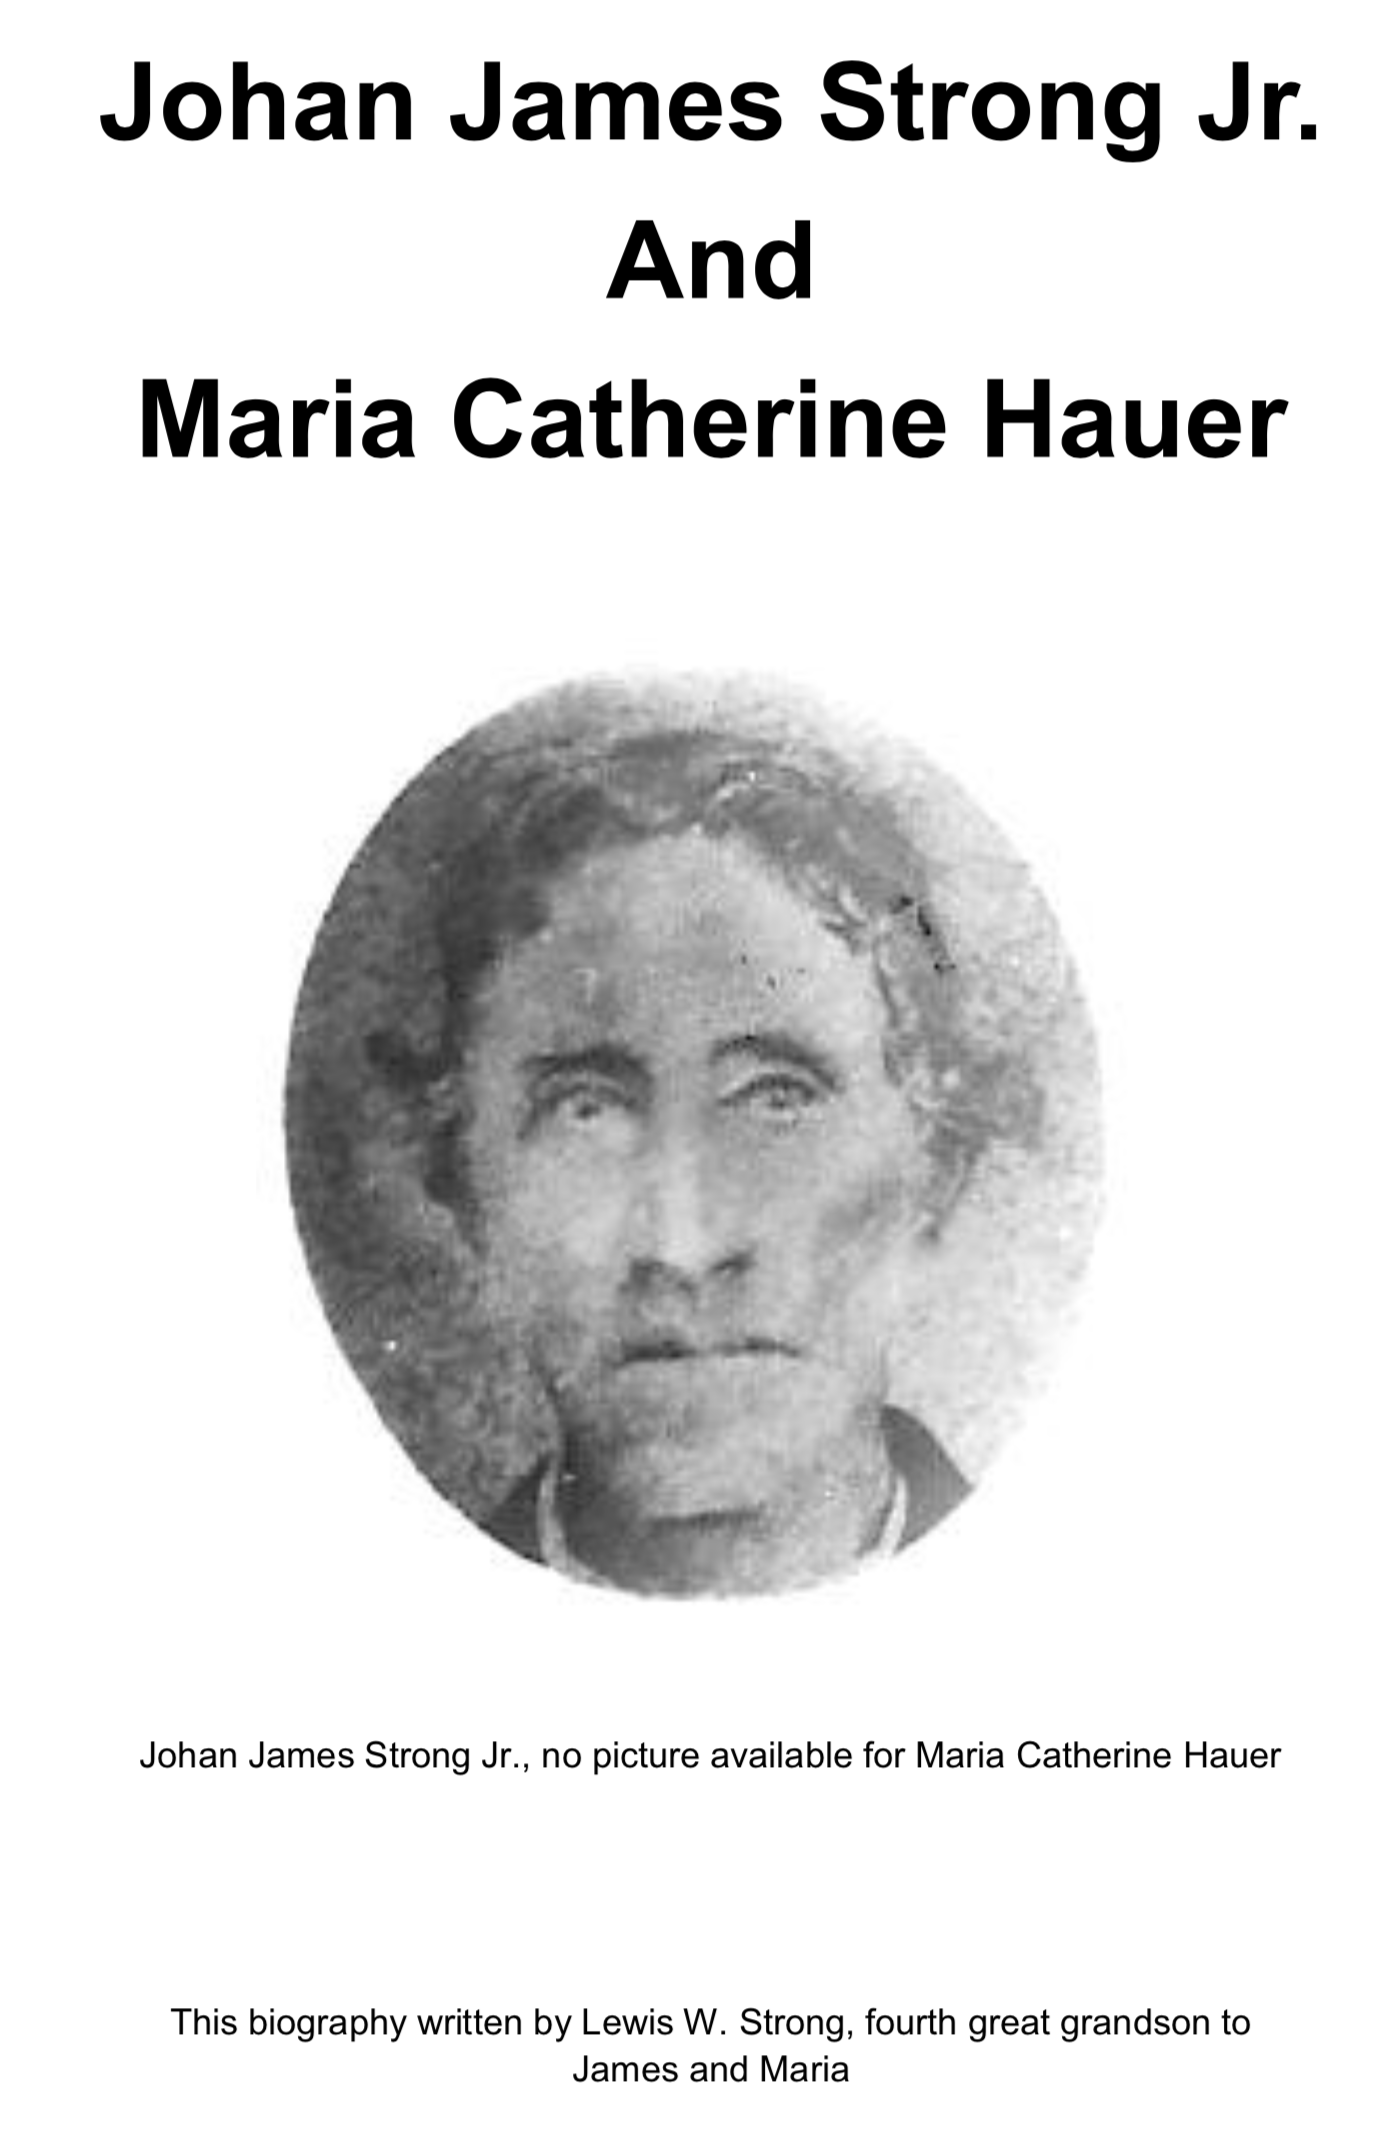 Johan James Strong Jr and Maria Catherine Hauer